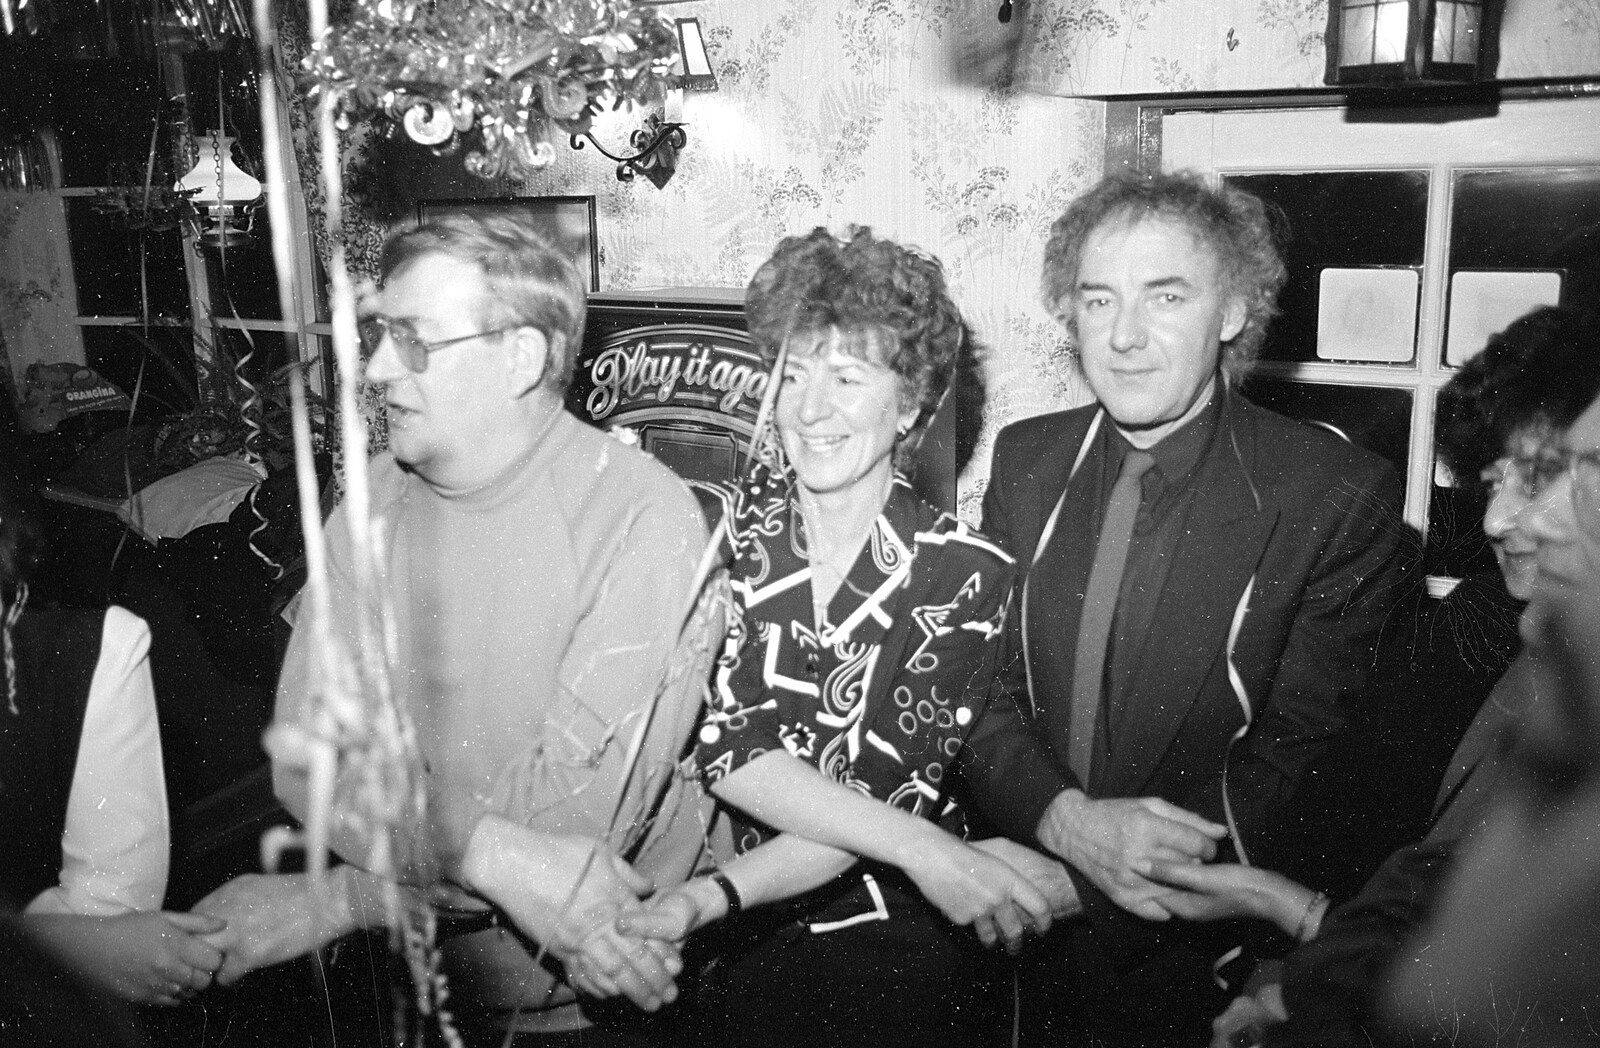 More Auld Lang Syne from New Year's Eve at the Swan Inn, Brome, Suffolk - 31st December 1992